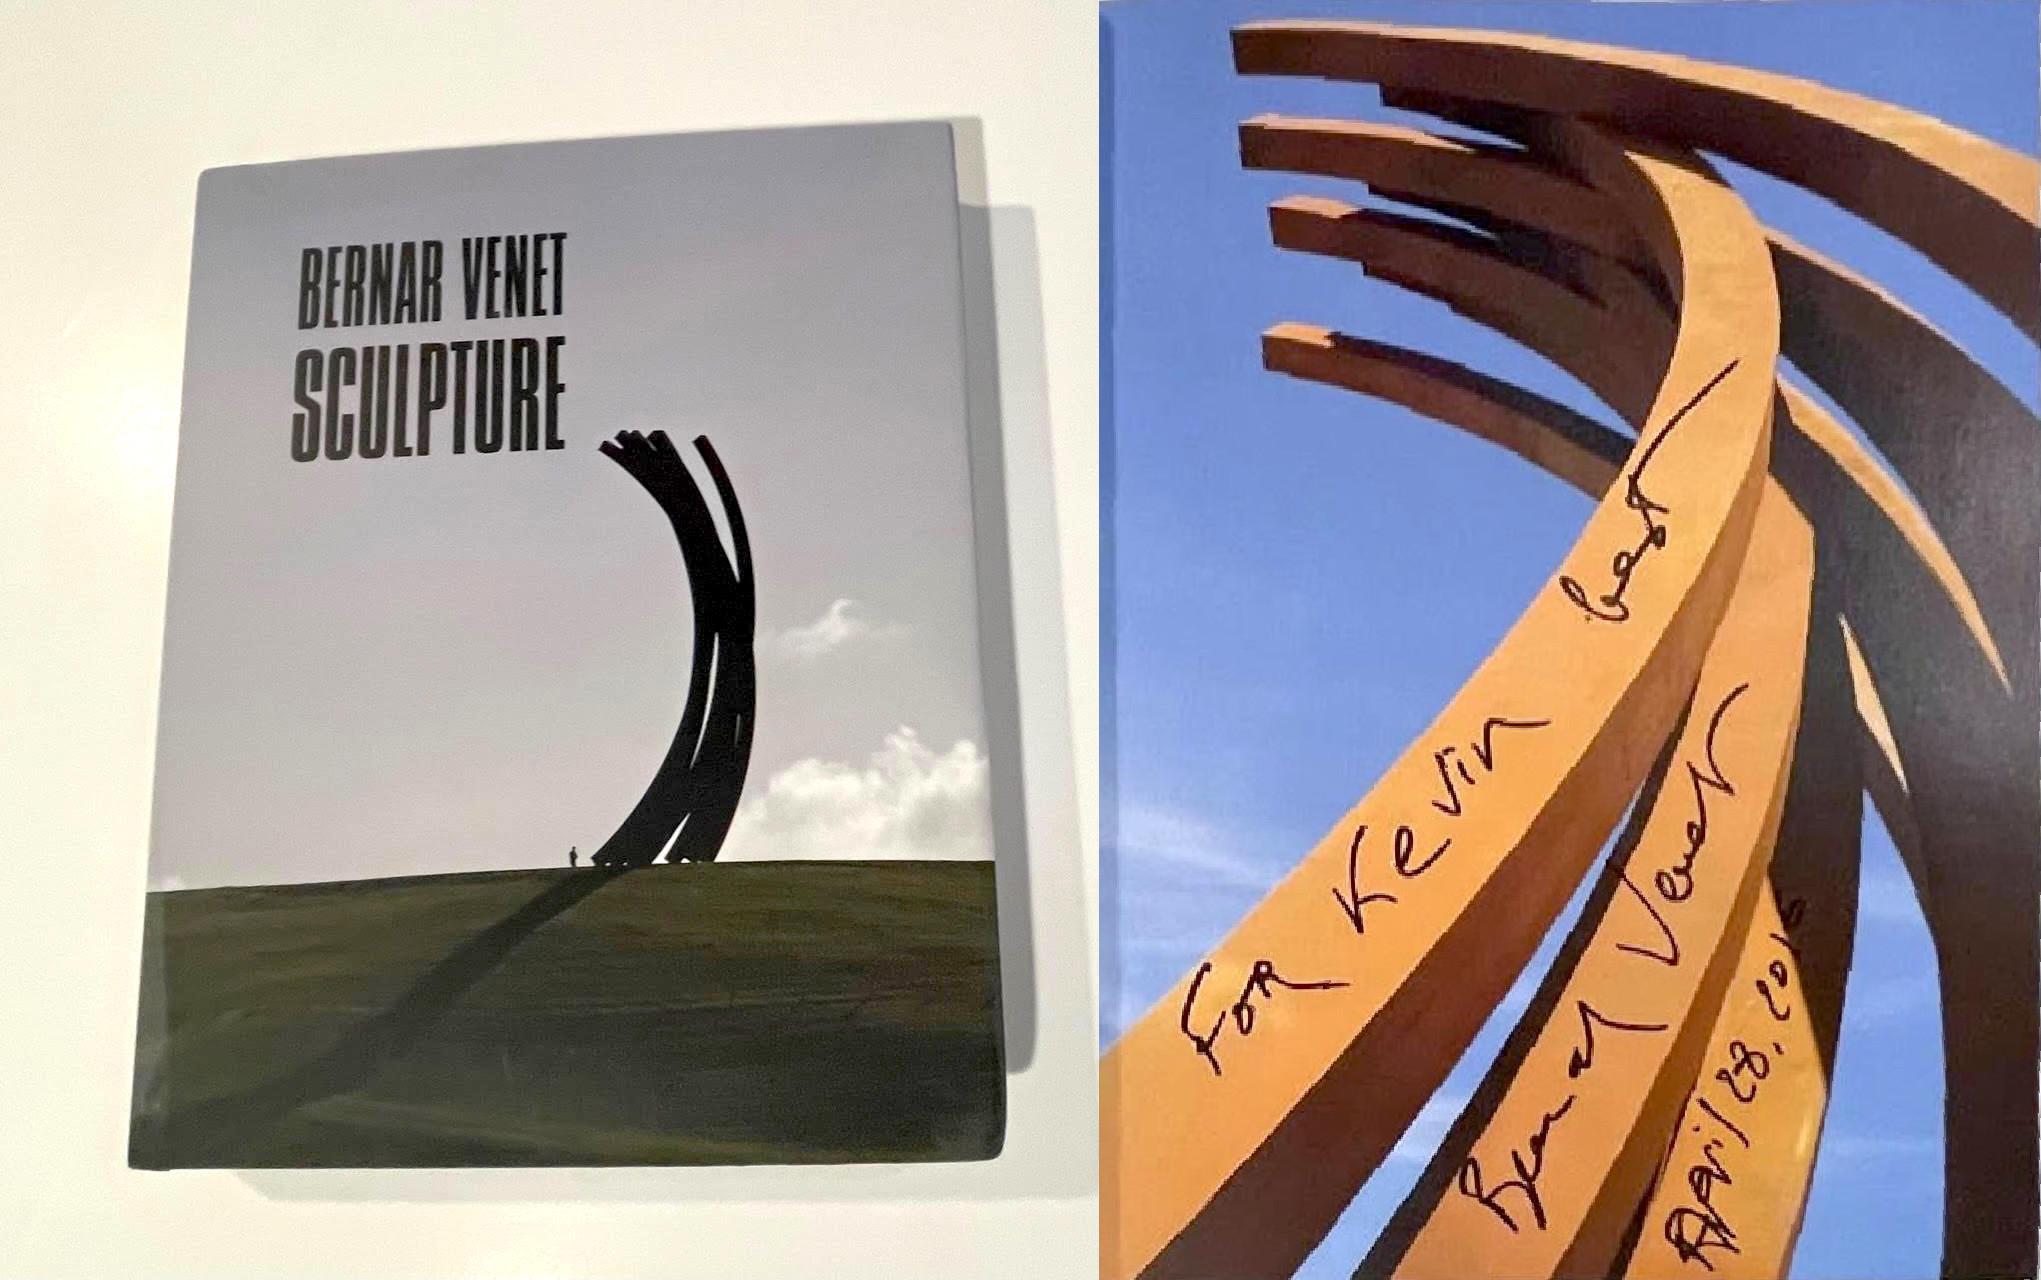 Bernar Venet Sculpture (Monograph - hand signed and inscribed to Kevin by Venet)